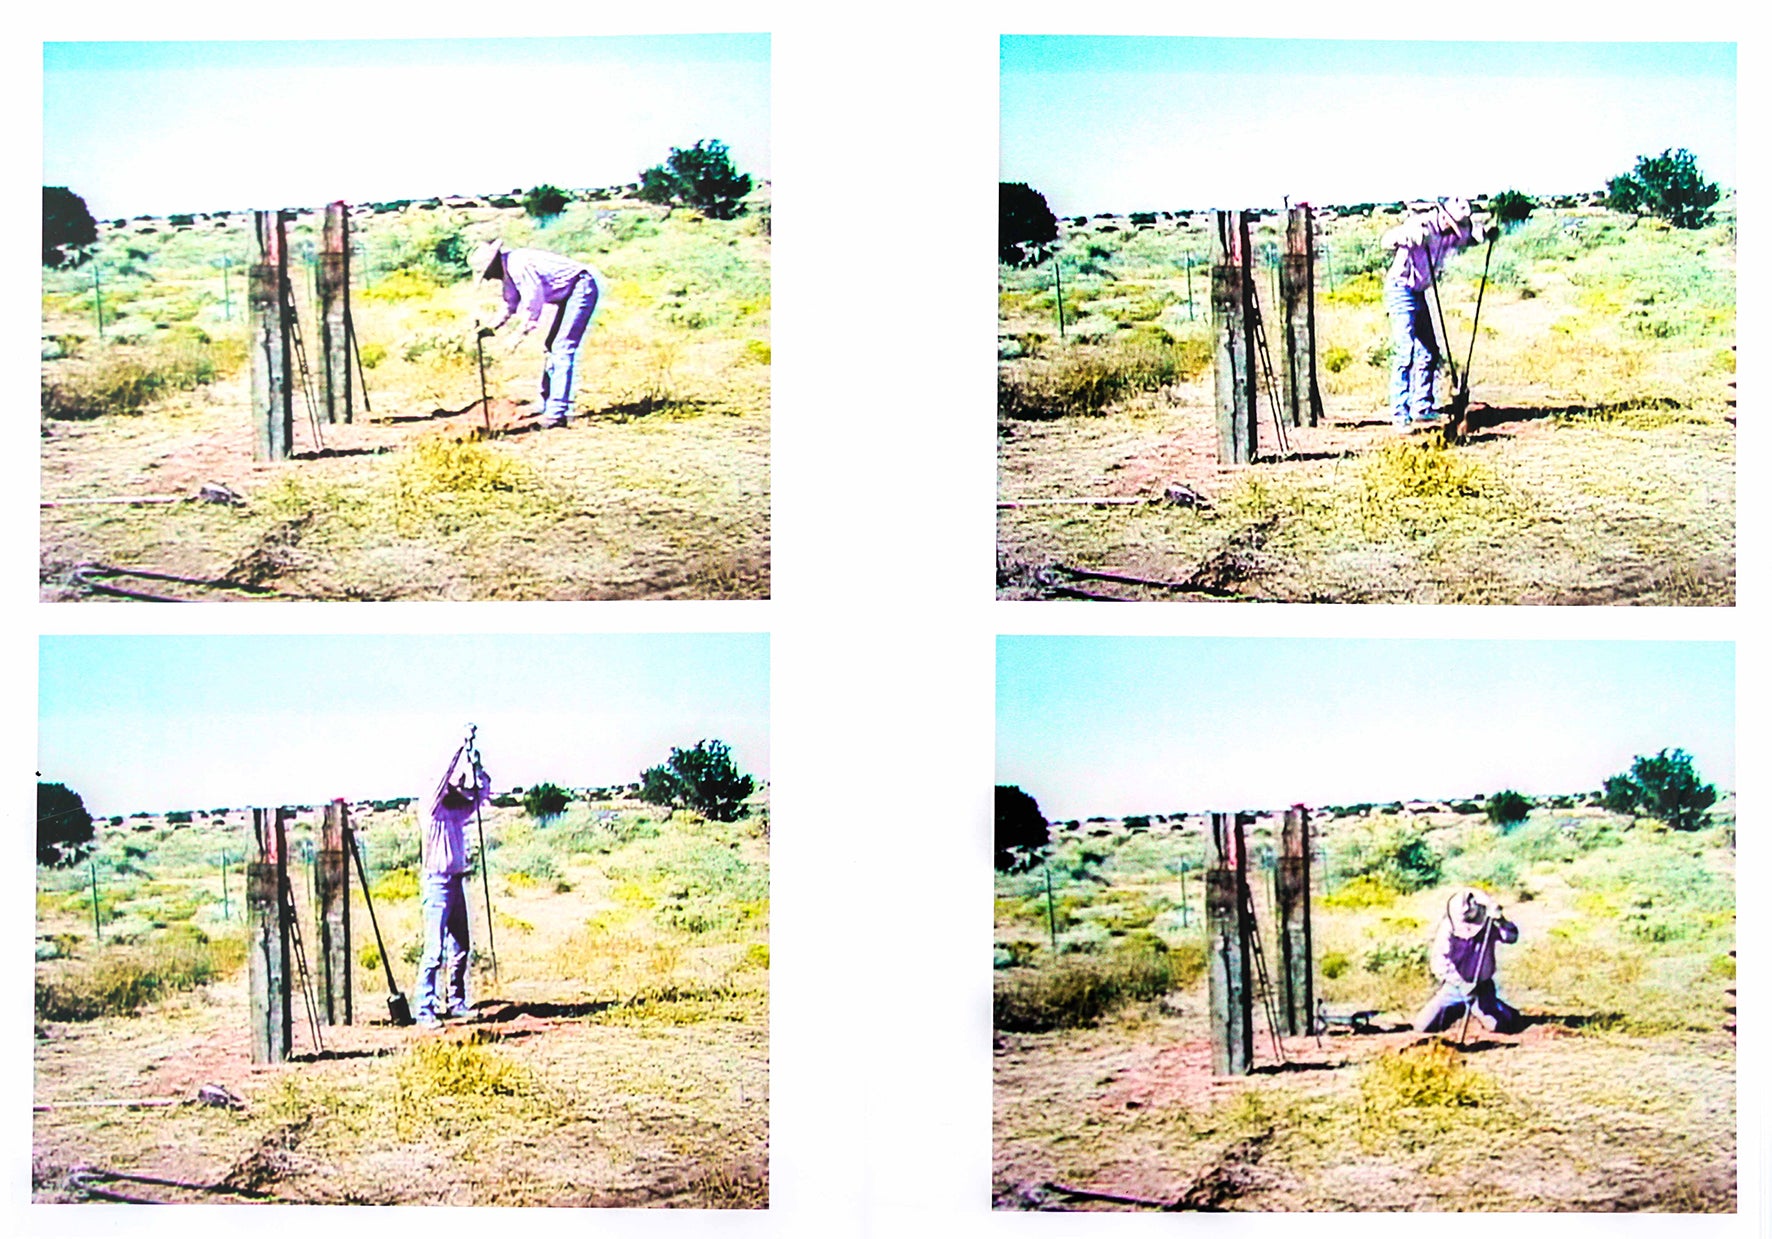 A spread depicting four video stills, two on each page, of a person kneeling, standing and handling a tool in a field. There is bushes and the vegetation in the background, while the sky looks clear.